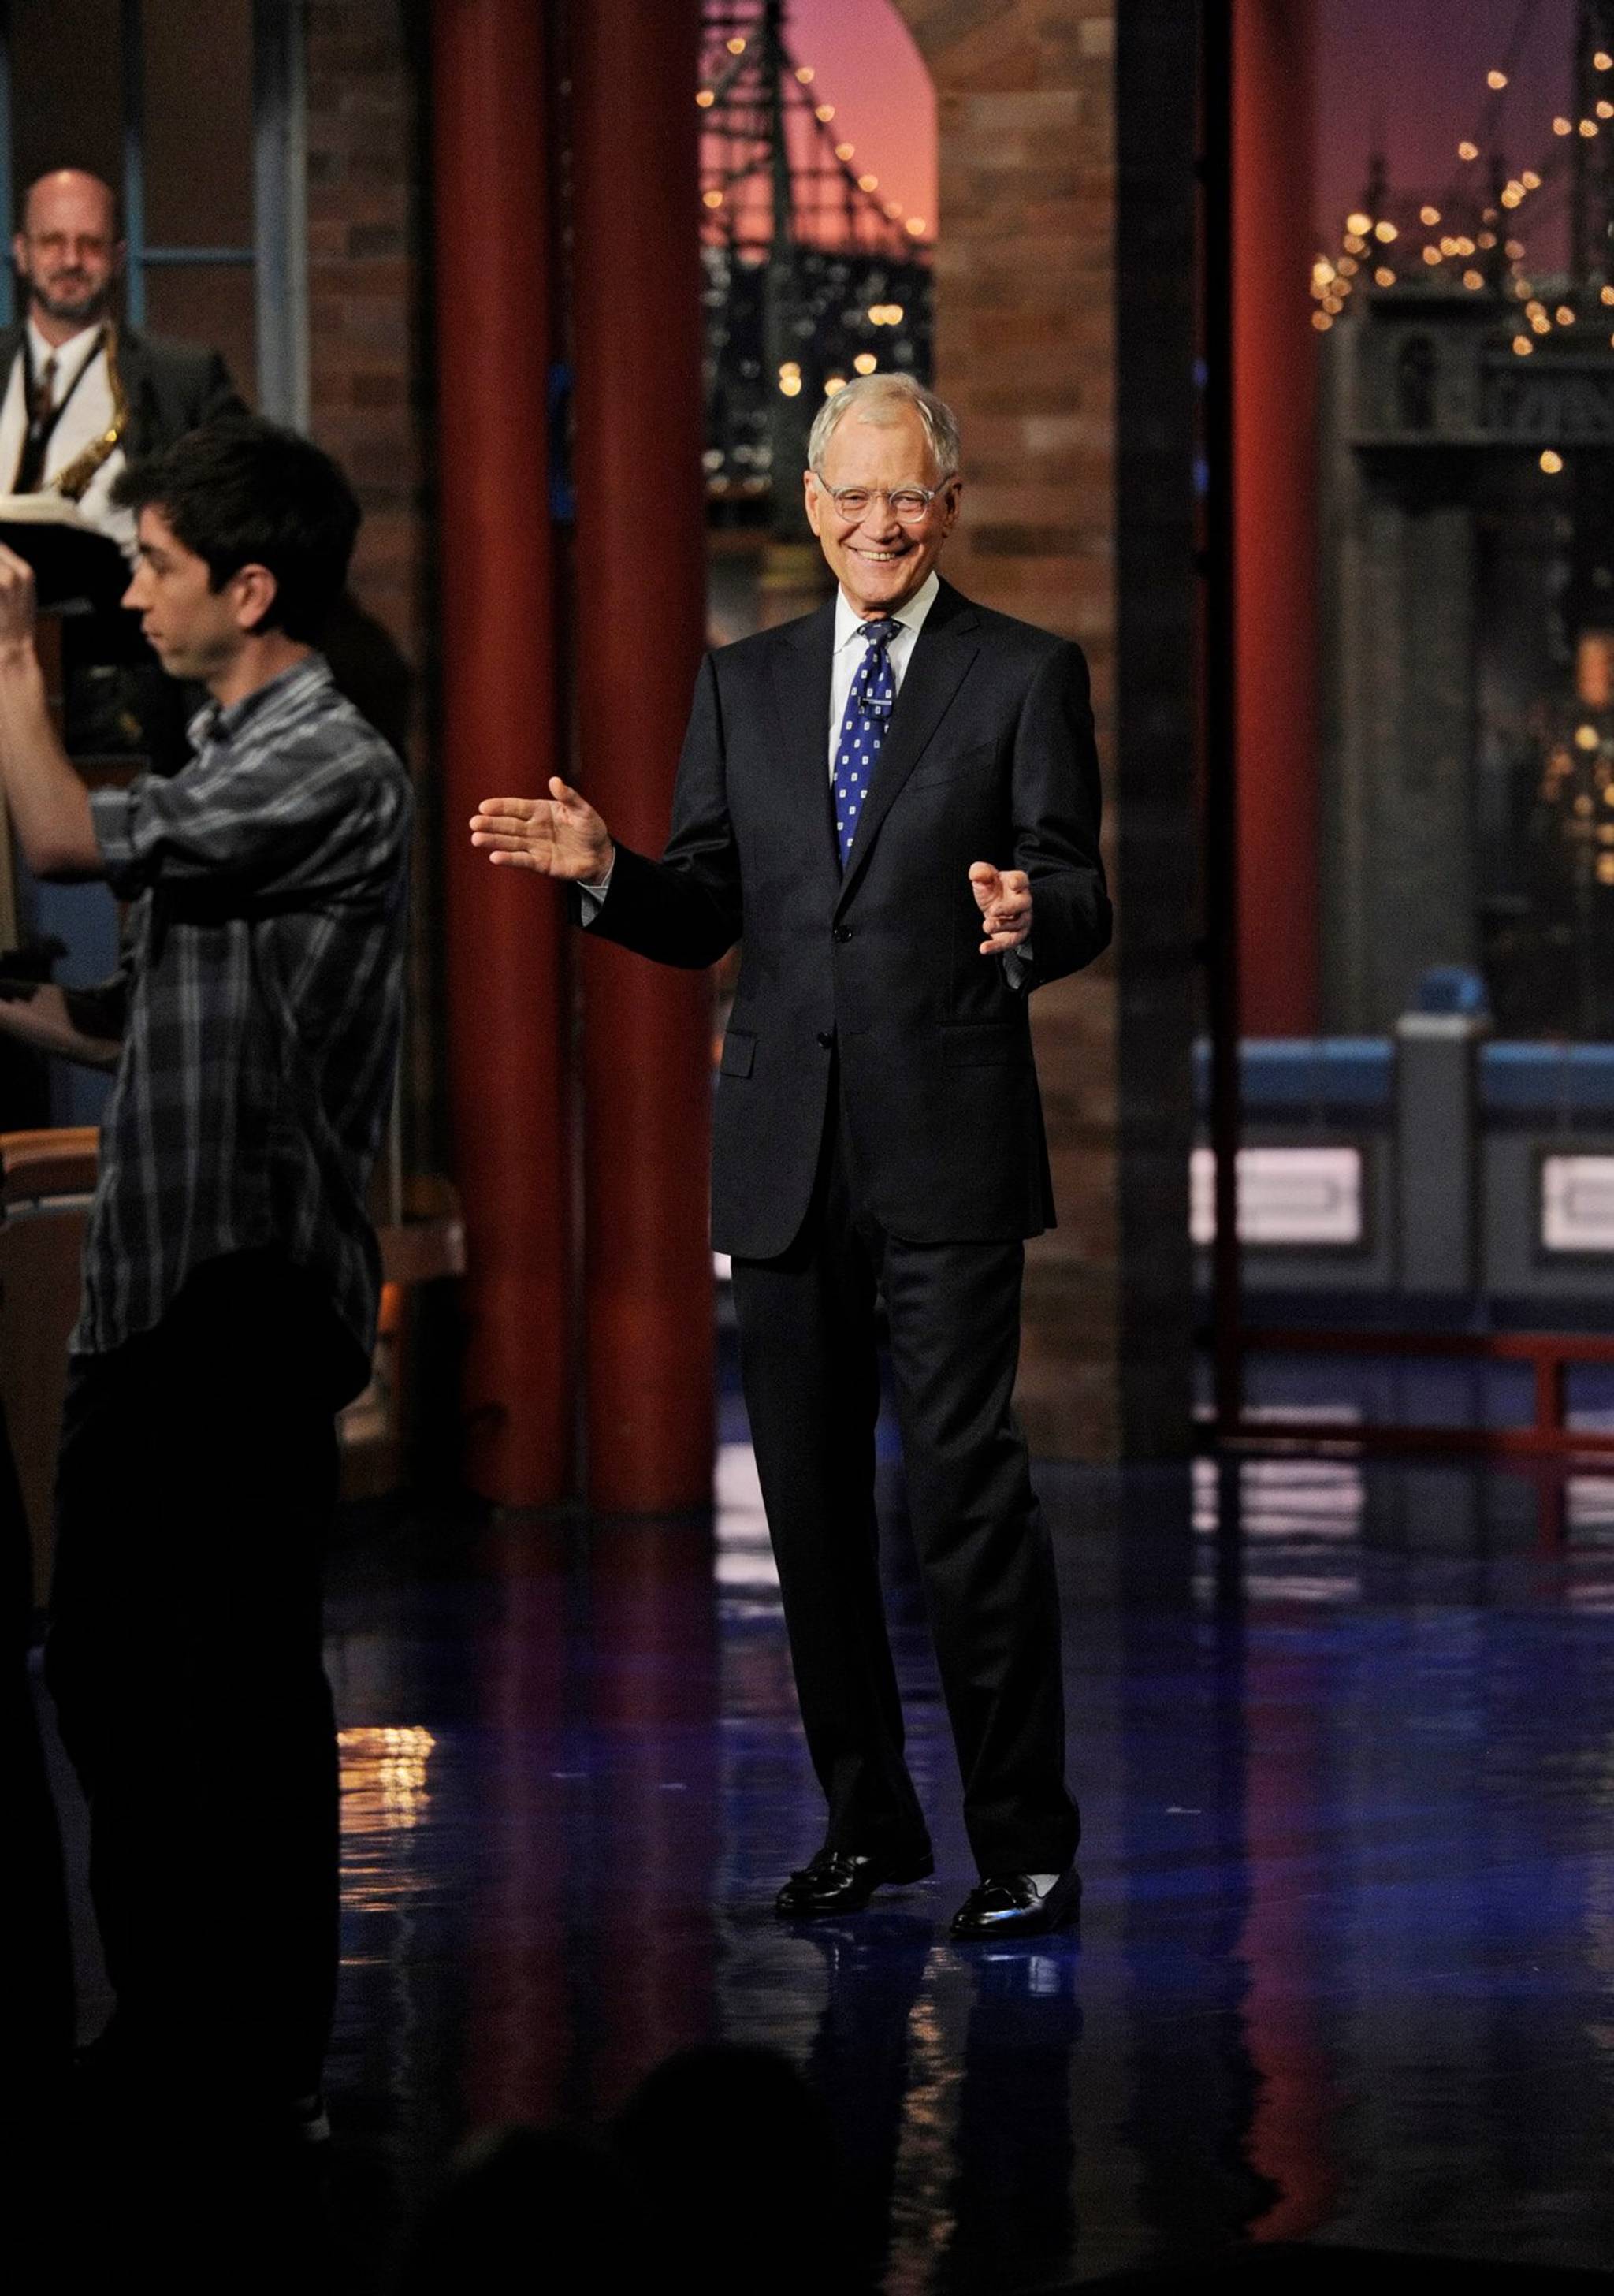 Netflix appeals to Boomers with Letterman show